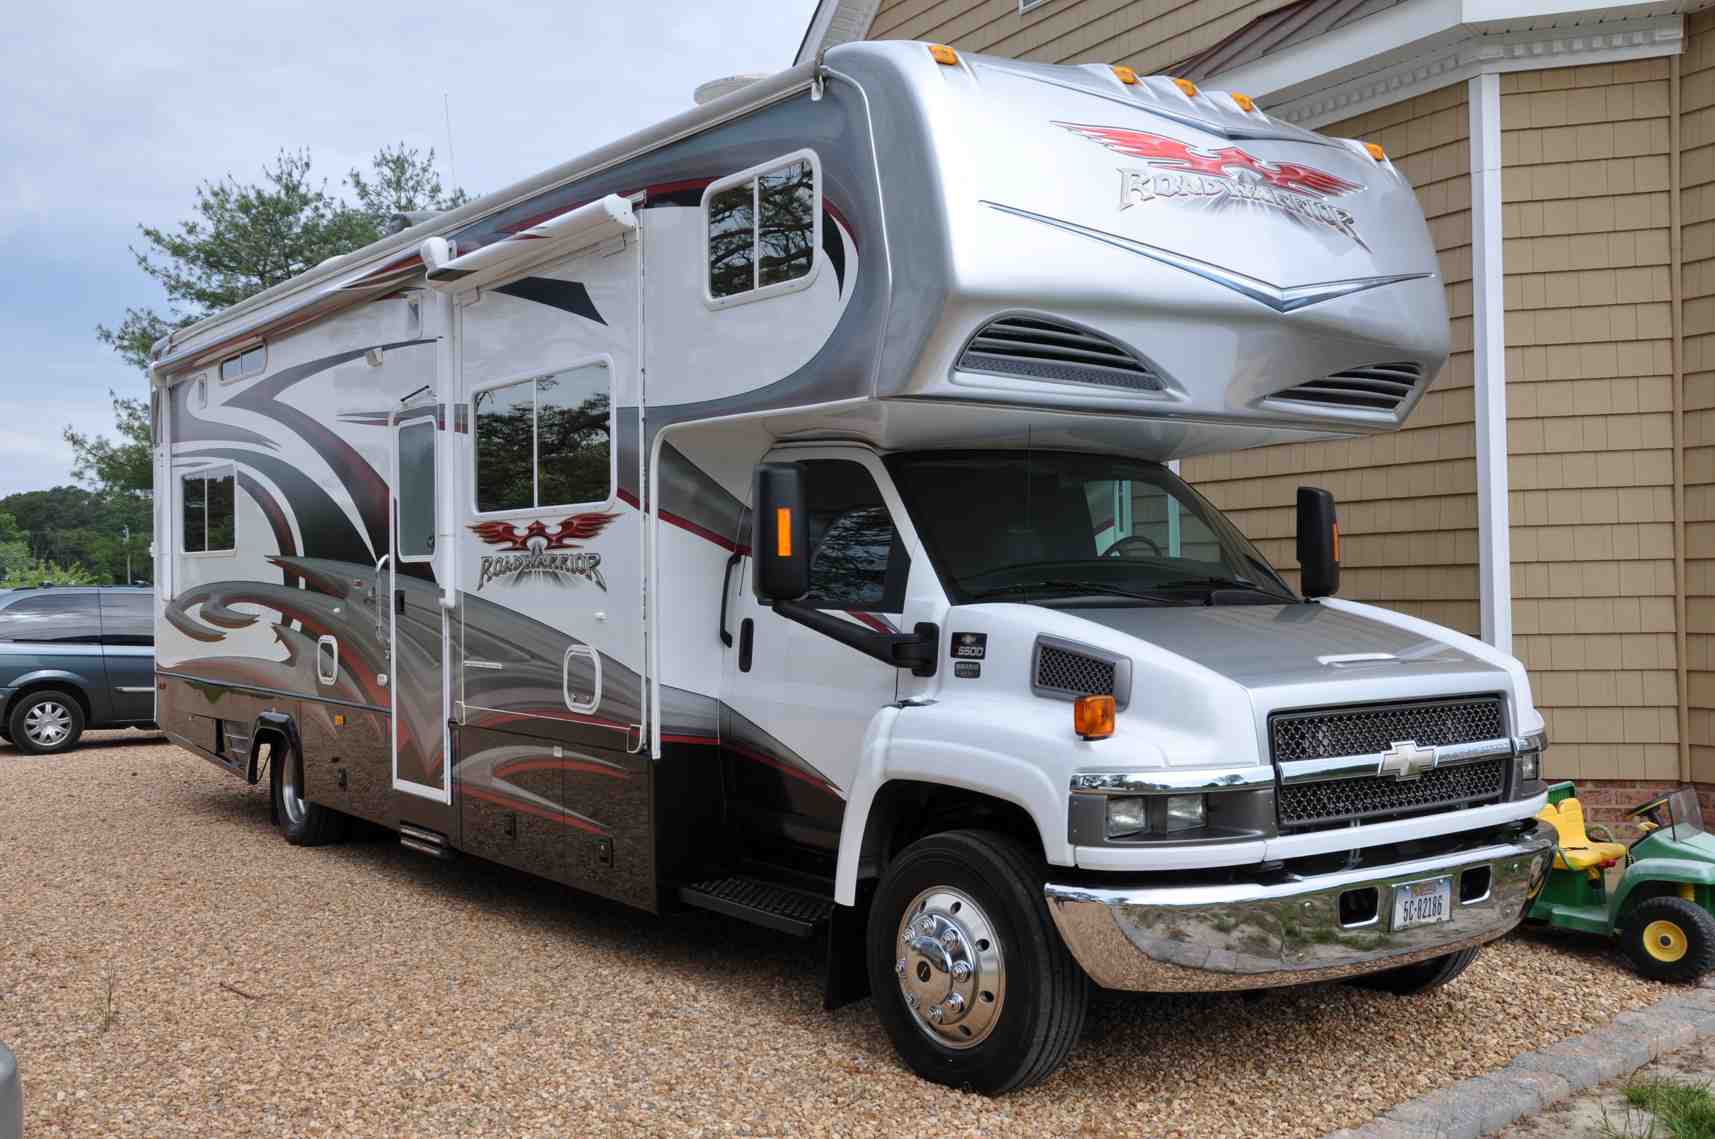 The DeBurgh Family's Road Warrior RV is Back The Way of the Passionate Warrior